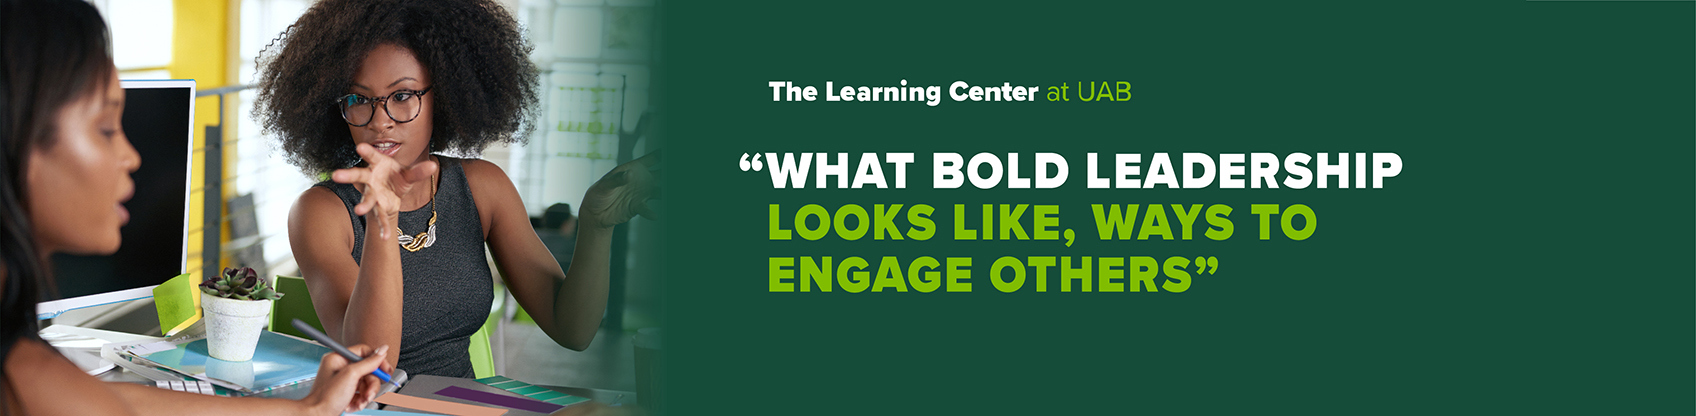 The Learning Center at UAB - Bold Leadership